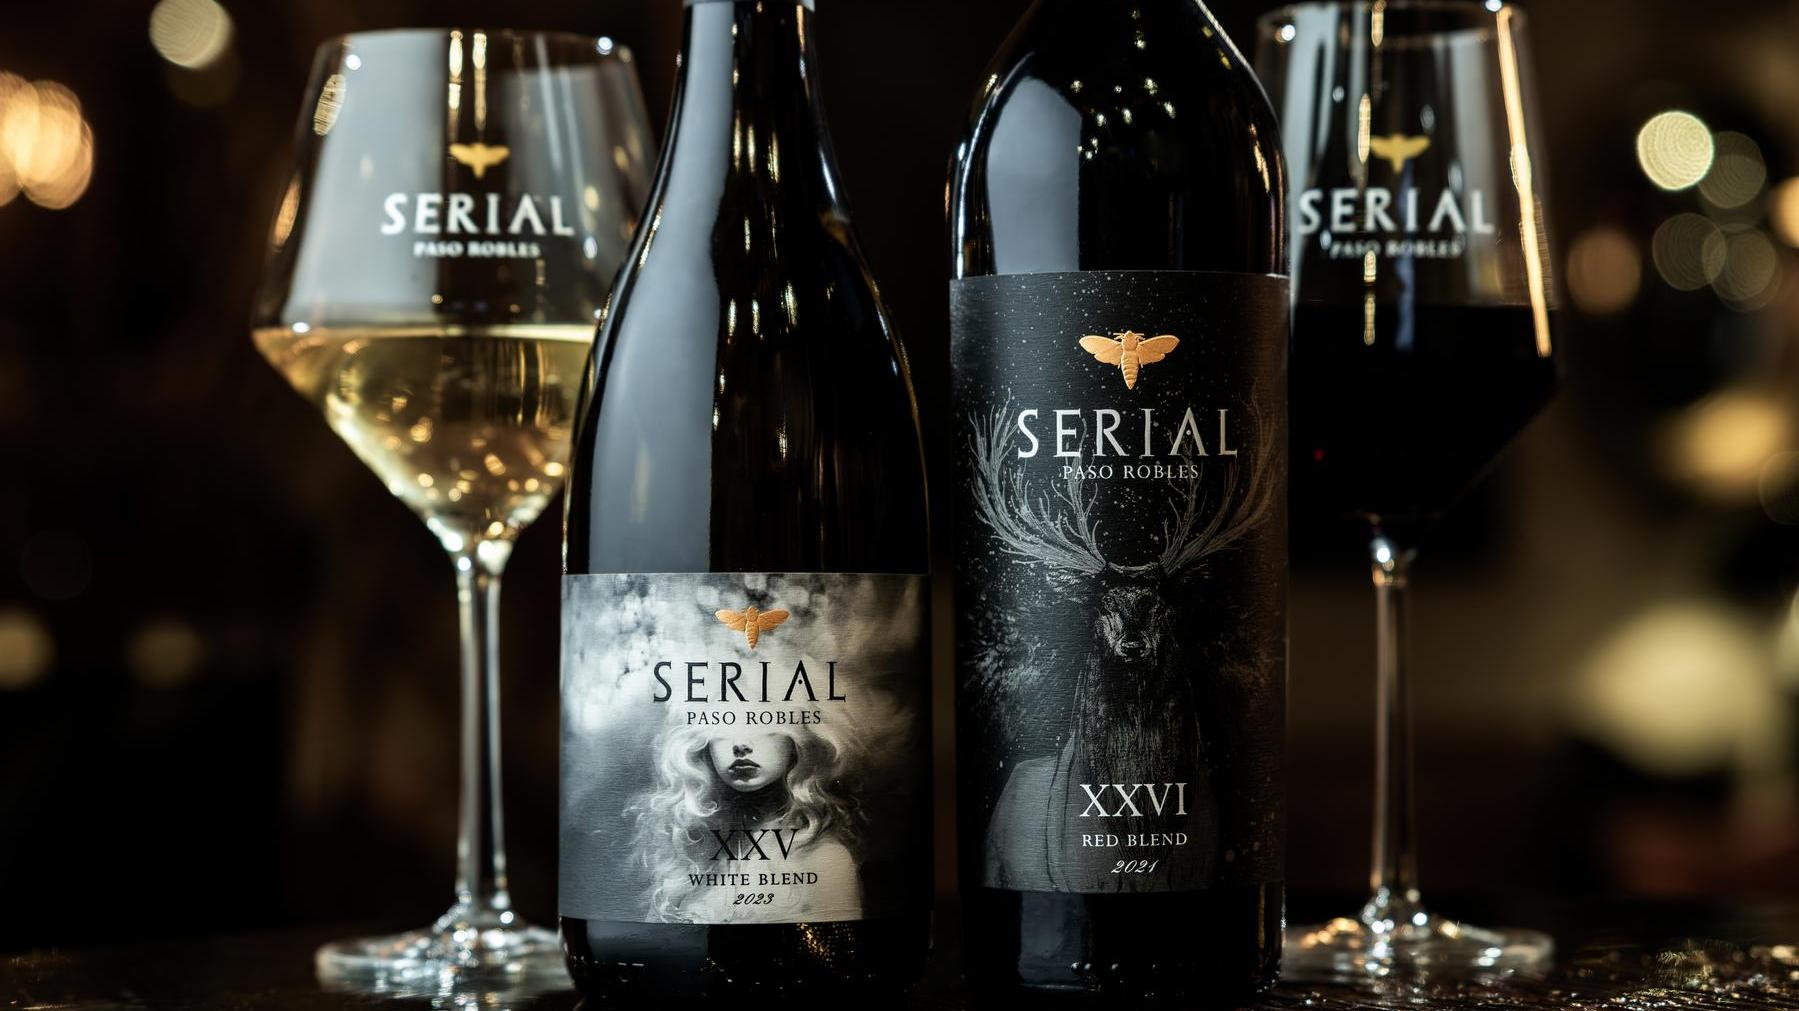 A photo showcasing two bottles of Serial Wines with labels featuring artistic designs. The bottle on the left, labeled Serial White Blend, depicts a young woman in a foggy landscape. The bottle on the right, labeled Serial Red Blend, features a majestic stag standing in the rain. Both bottles are placed in the stunning Serial Wines Tasting Lounge in Paso Robles.